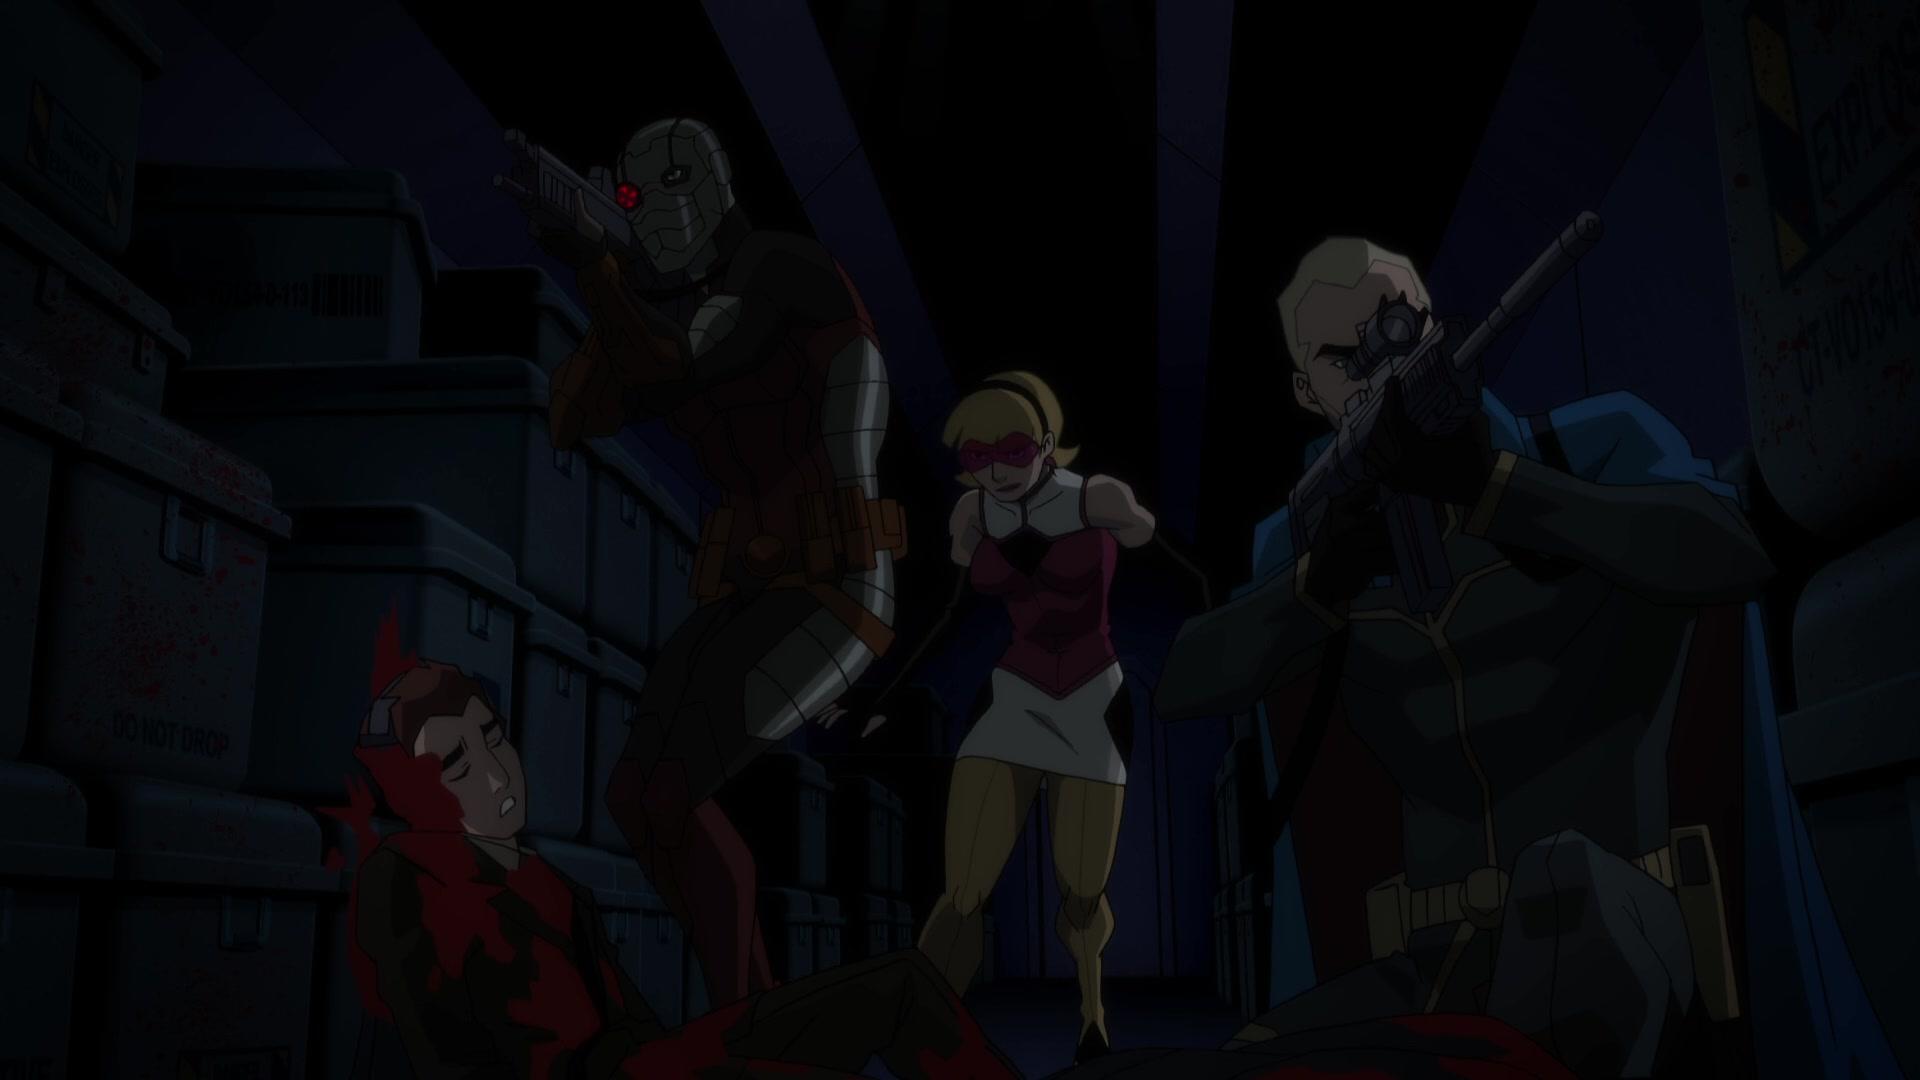 4 Clips of Suicide Squad Hell to Pay